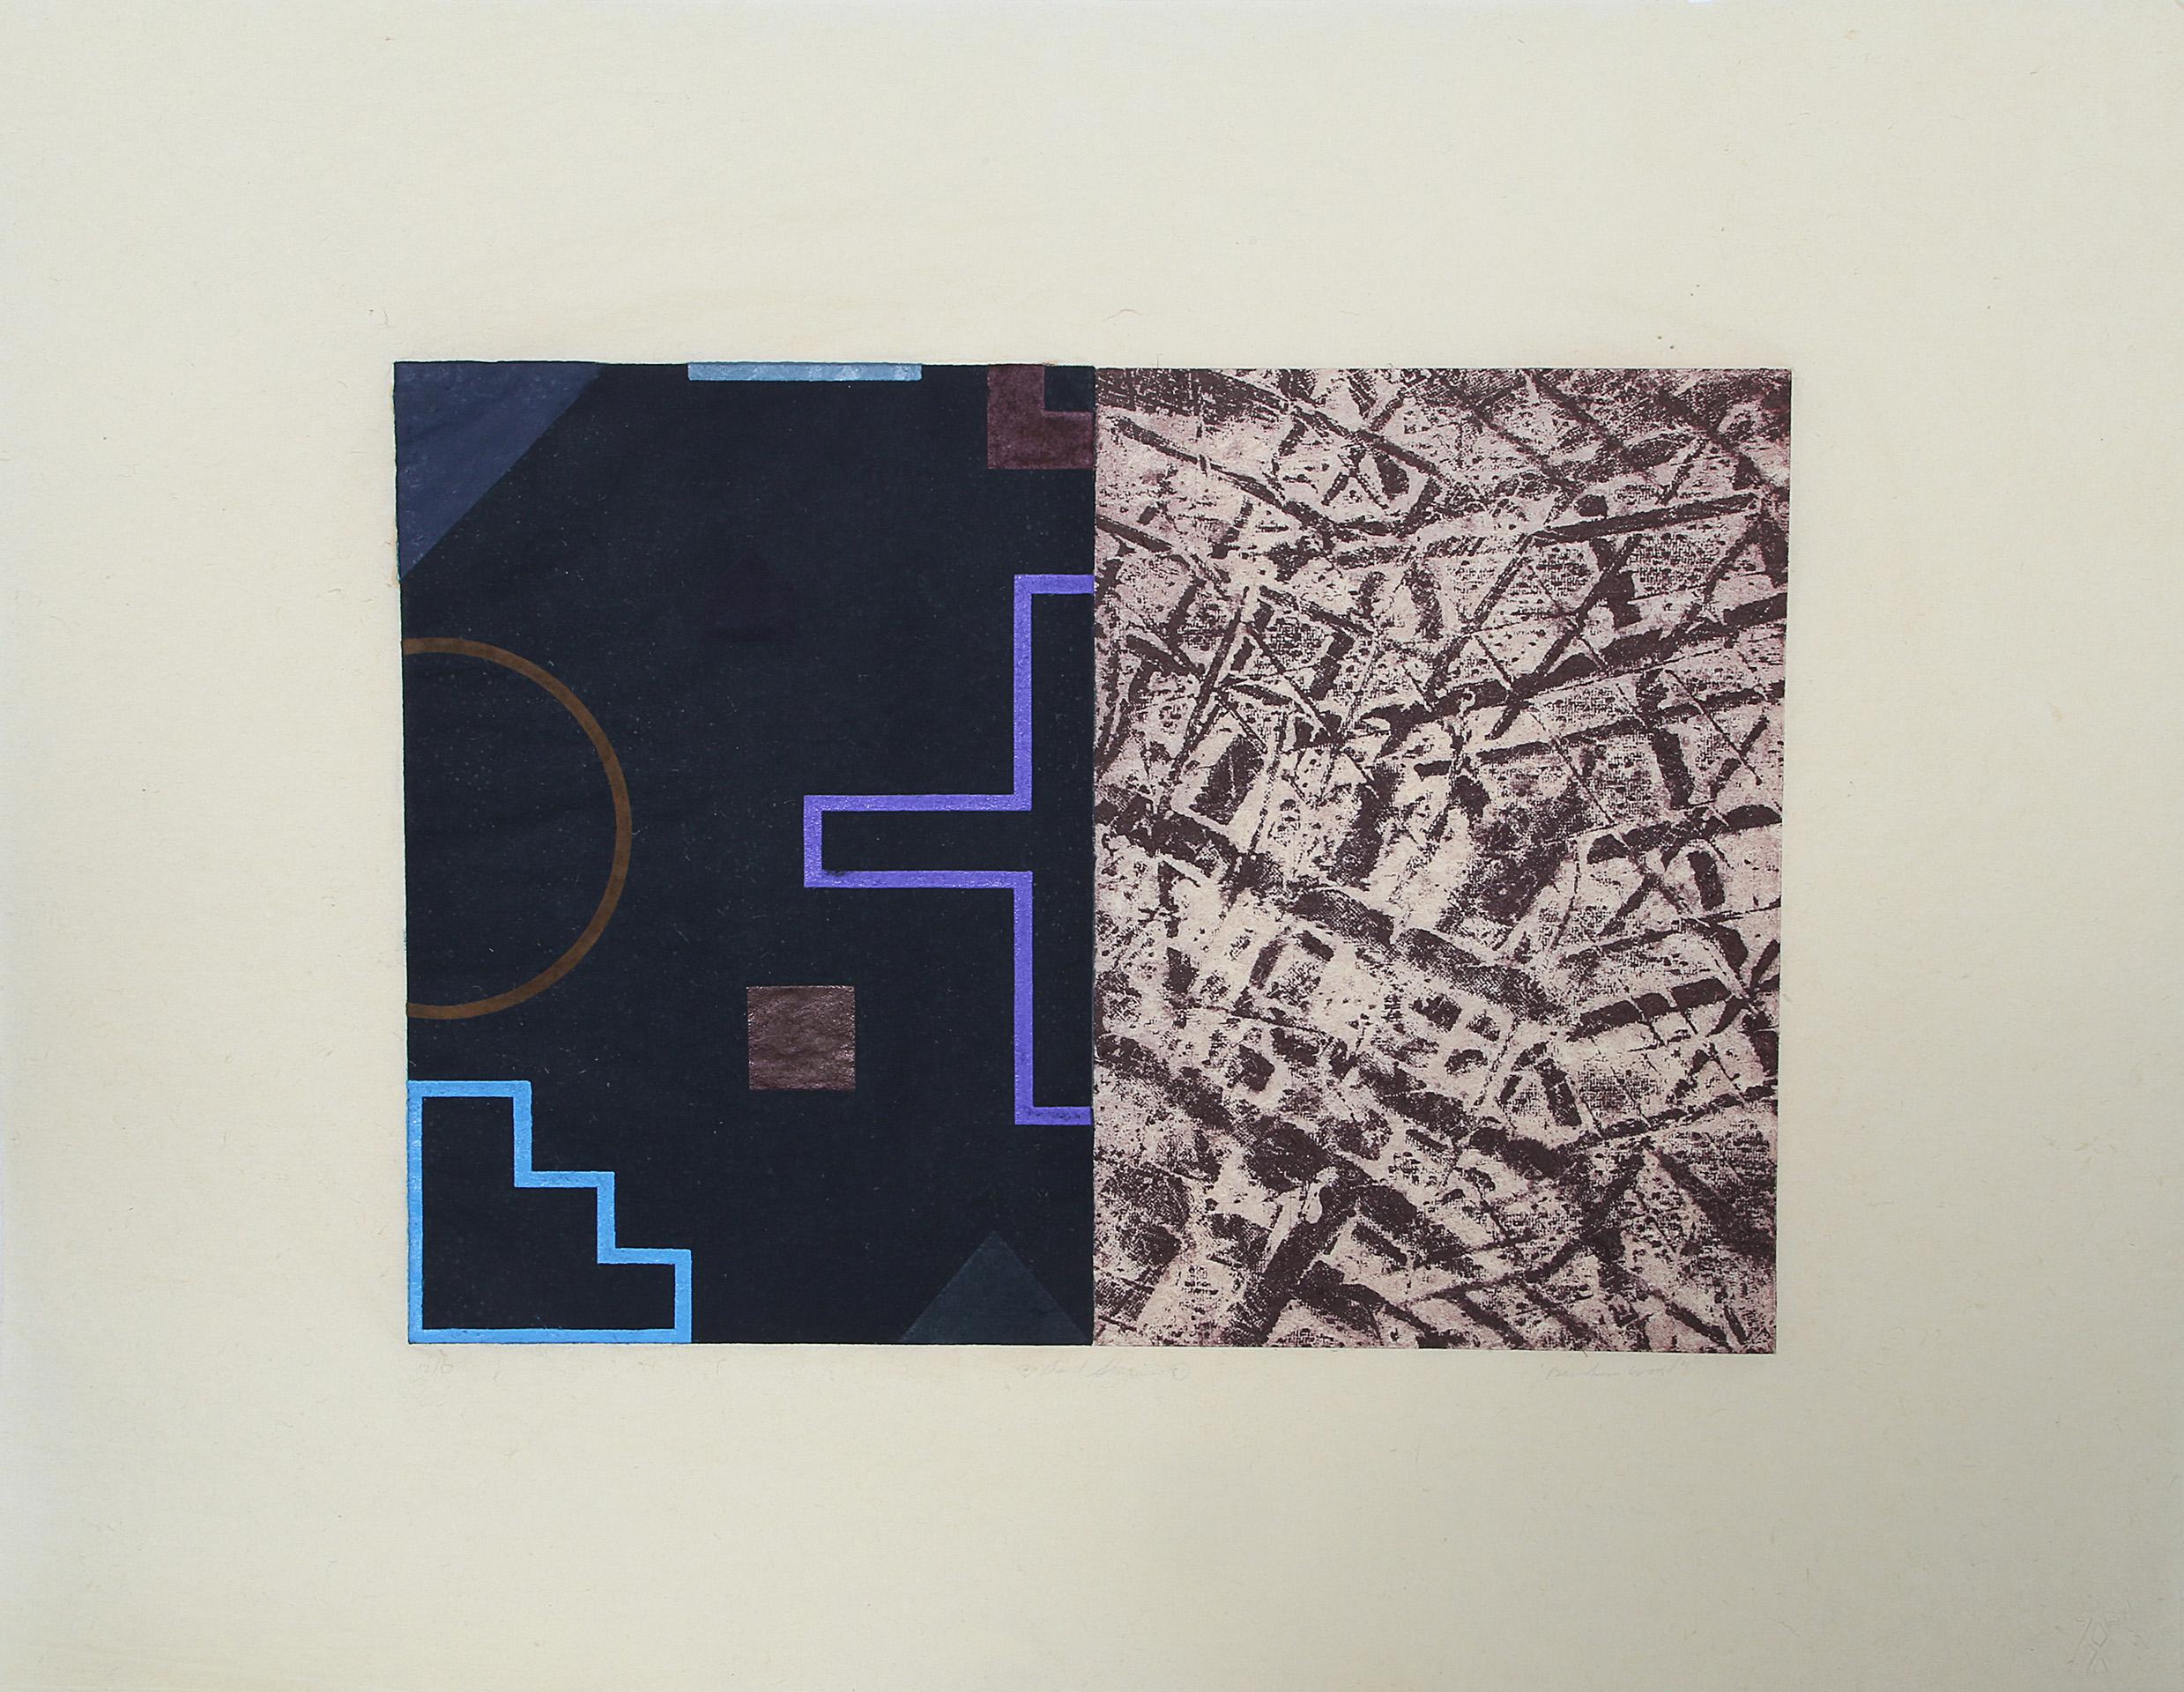 A detailed abstract geometric print by David Shapiro featuring a blend of aquatint and etching methods on Sekishu, a type of handmade Japanese paper. One half of the composition features messy, almost hand-painted grid lines while the other half is